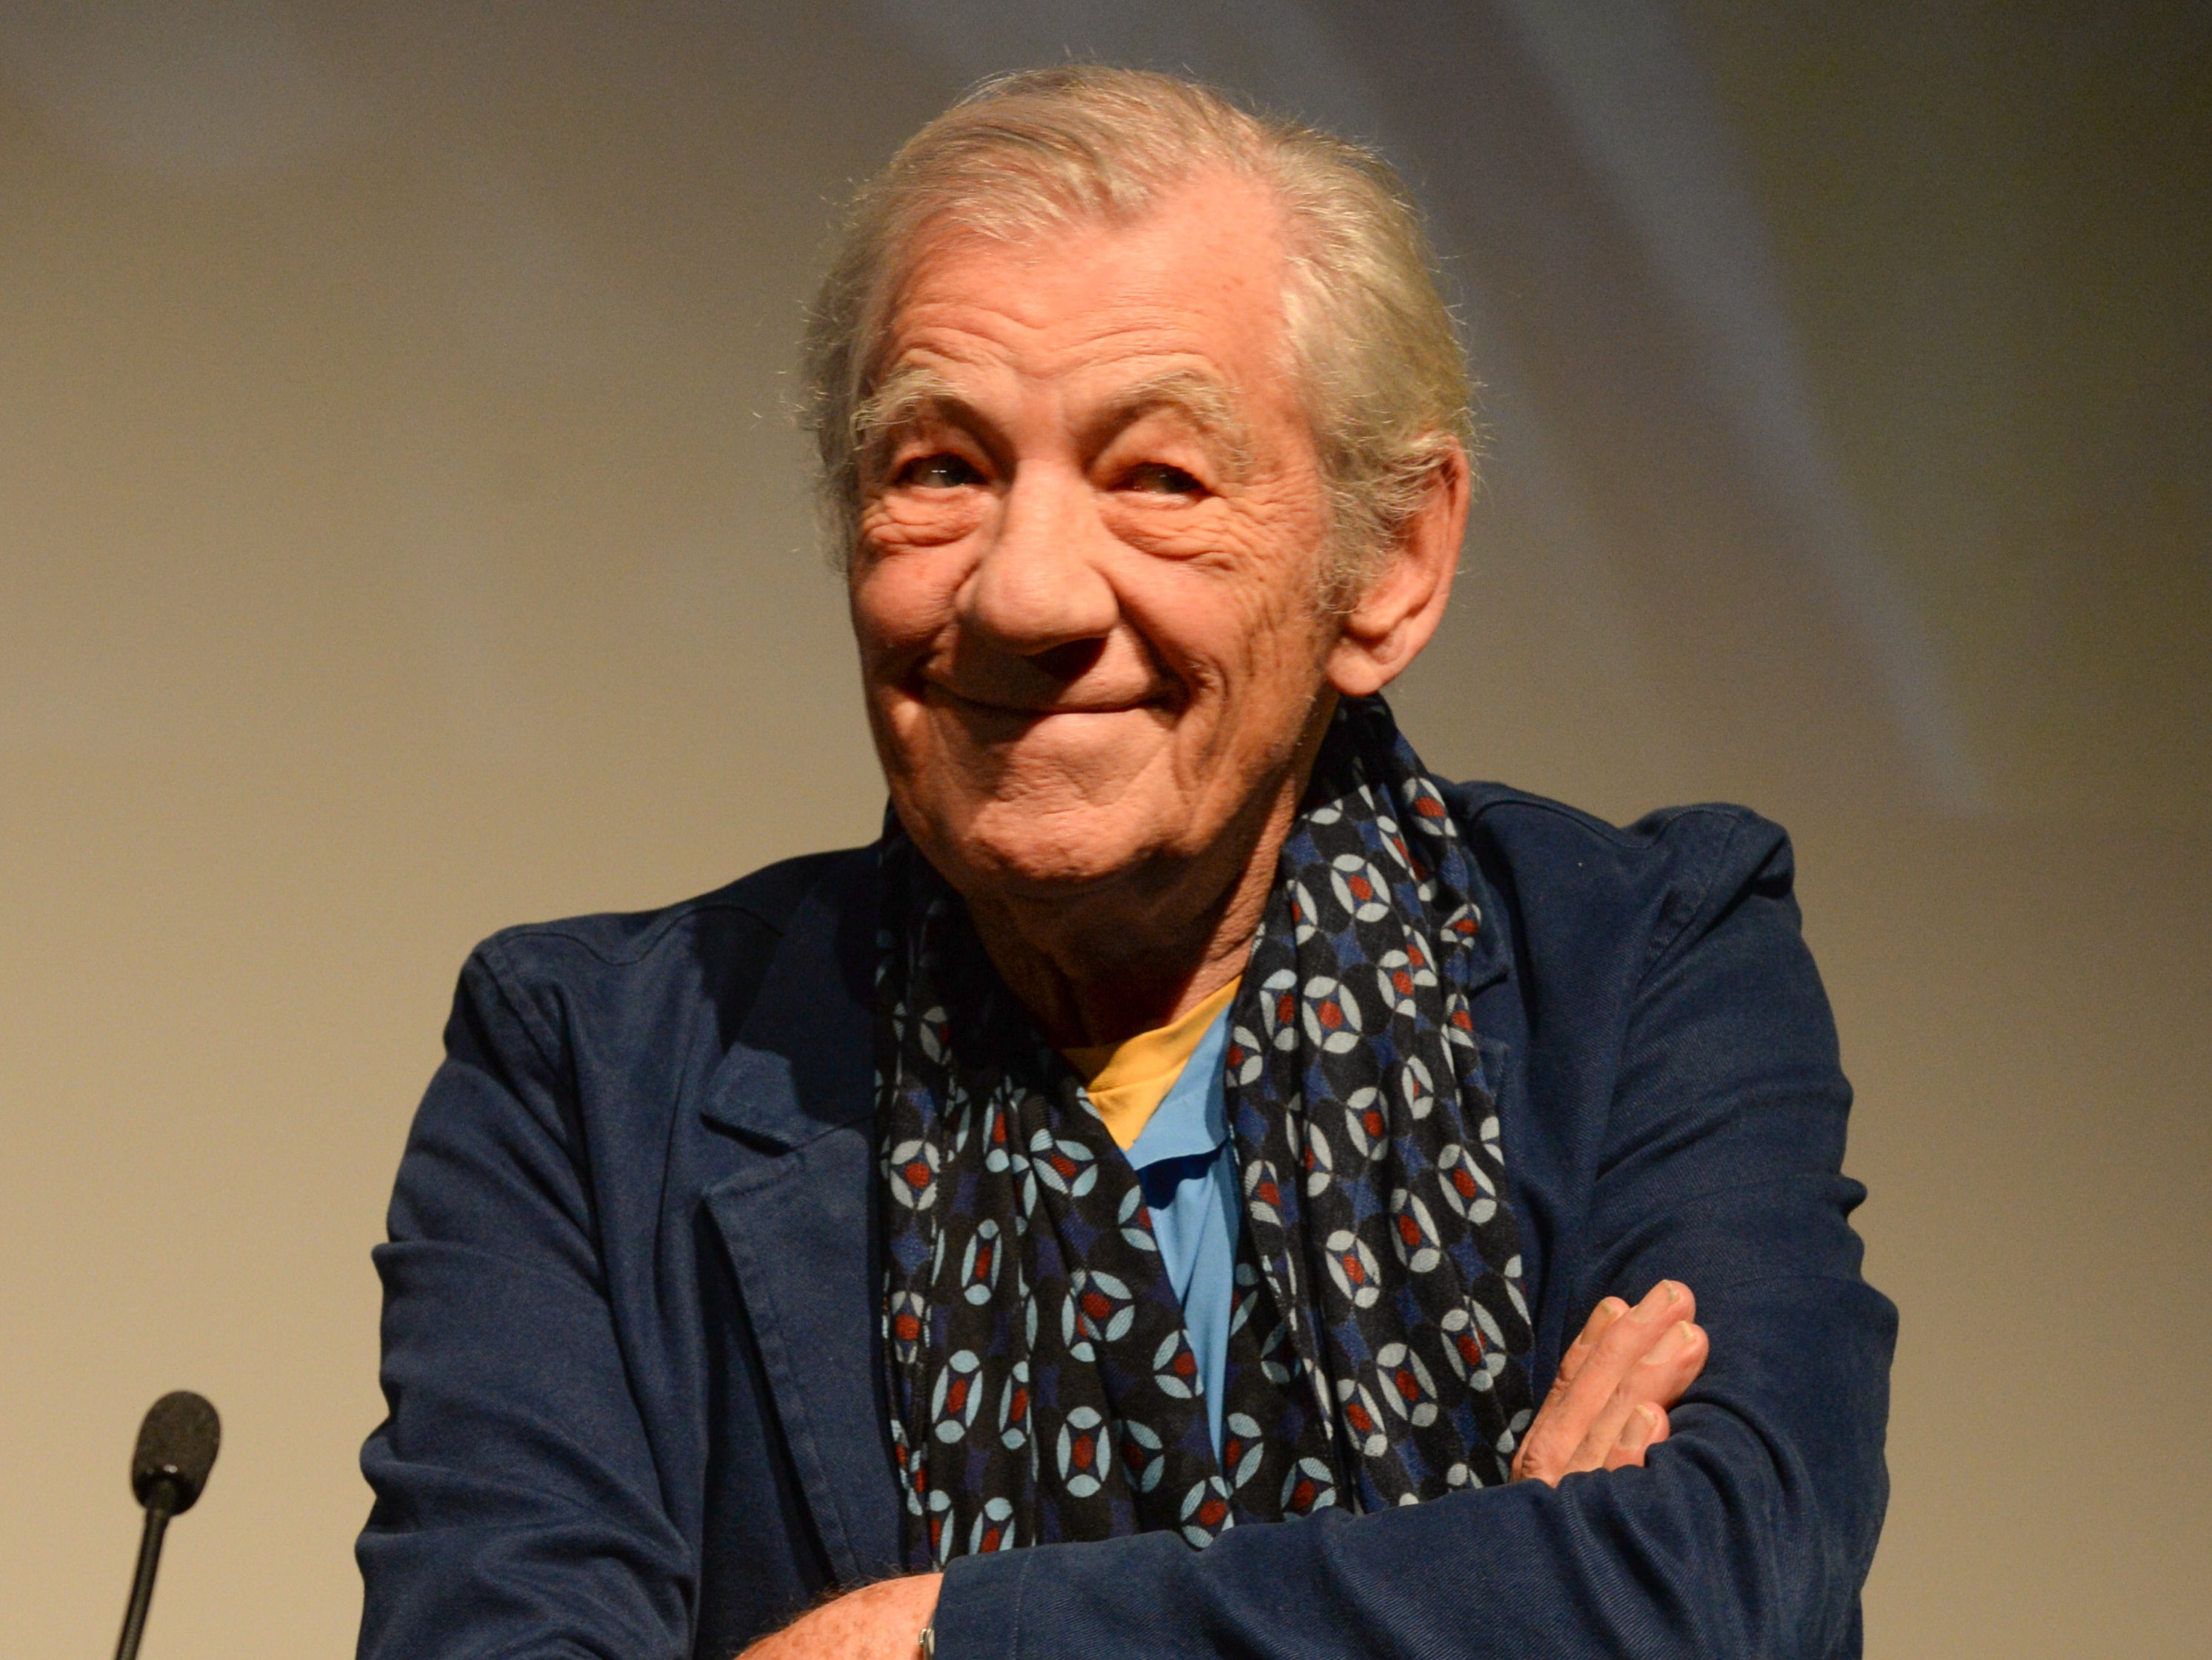 Sir Ian McKellen attends the “Bent” 25th anniversary screening and Q&A at the BFI Southbank on 27 September, 2022 in London, England.